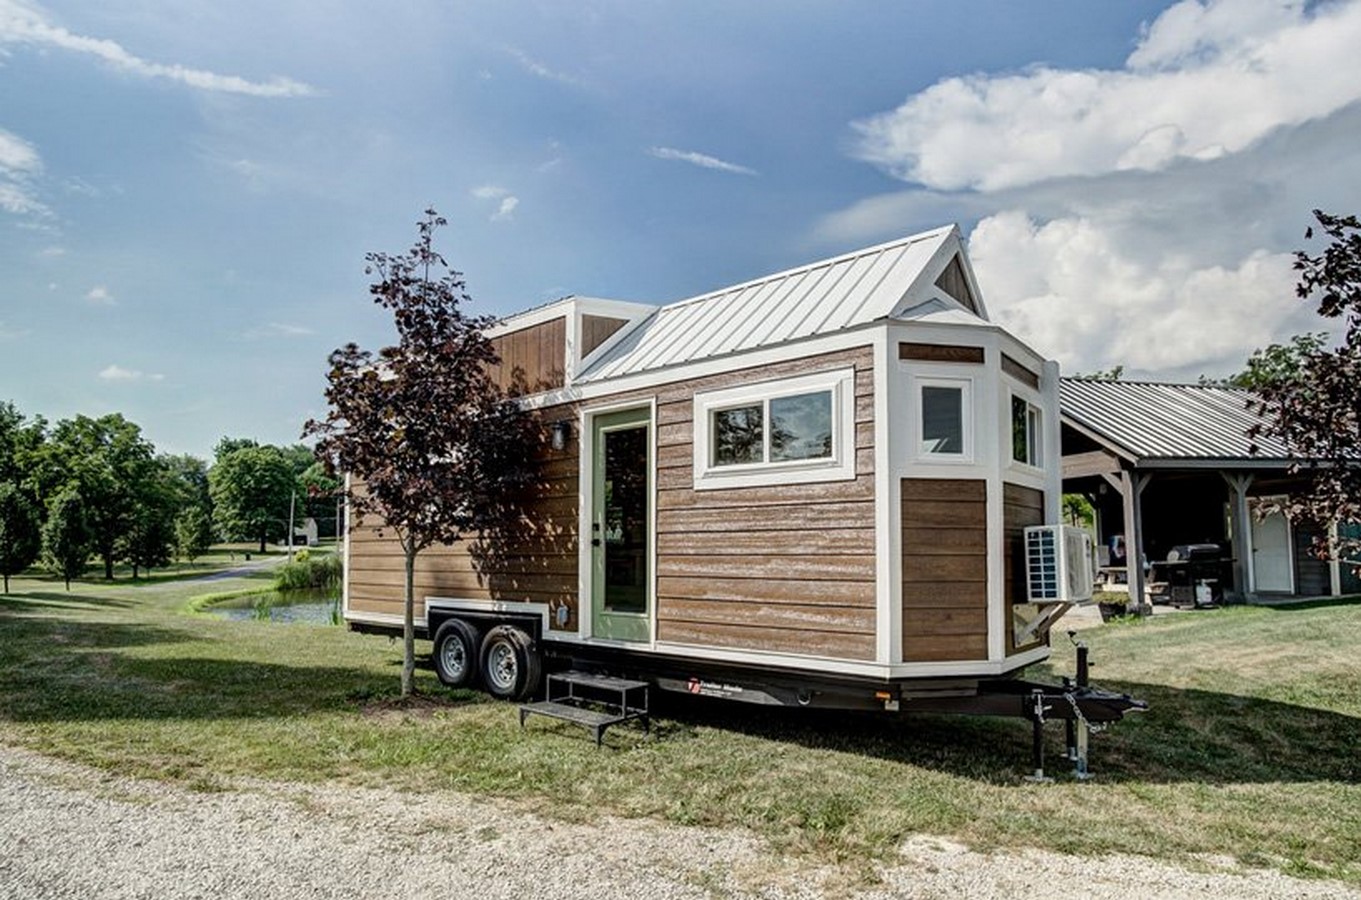 Architectural development of Tiny houses on wheels - Sheet12